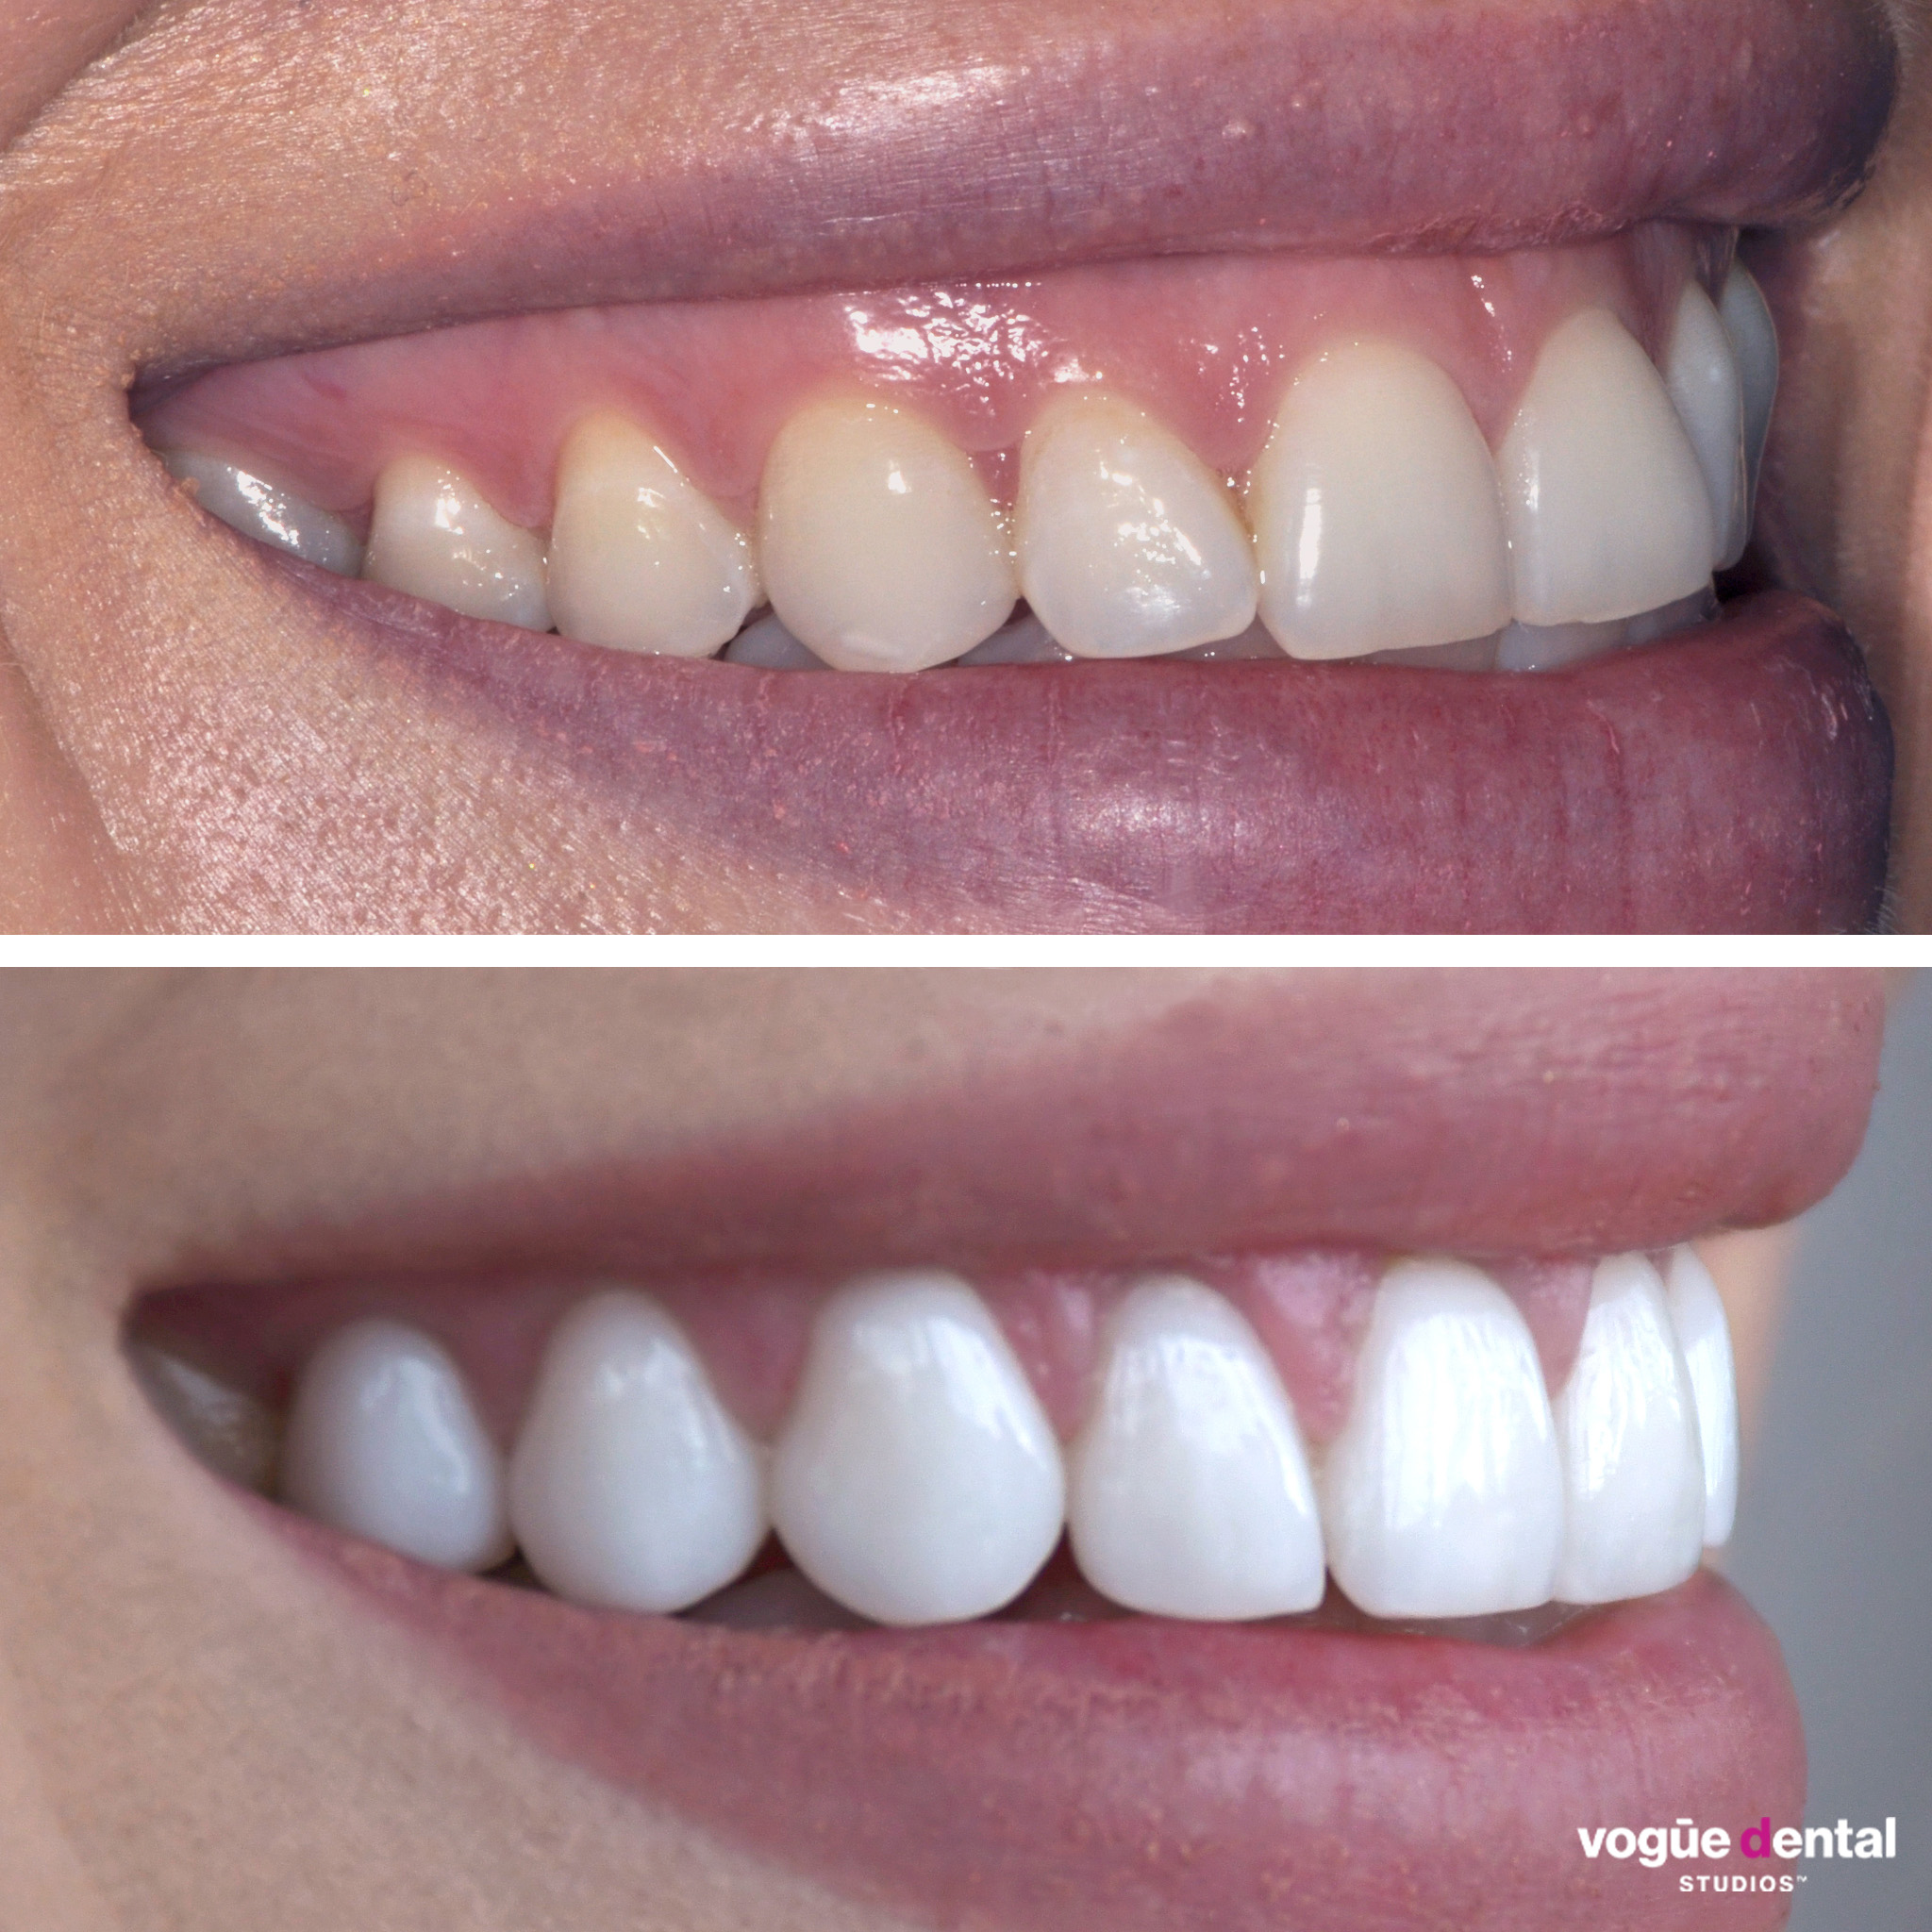 Before and after gummy smile and smile cant correction with porcelain veneers at Vogue Dental Studios - left view Cassie.